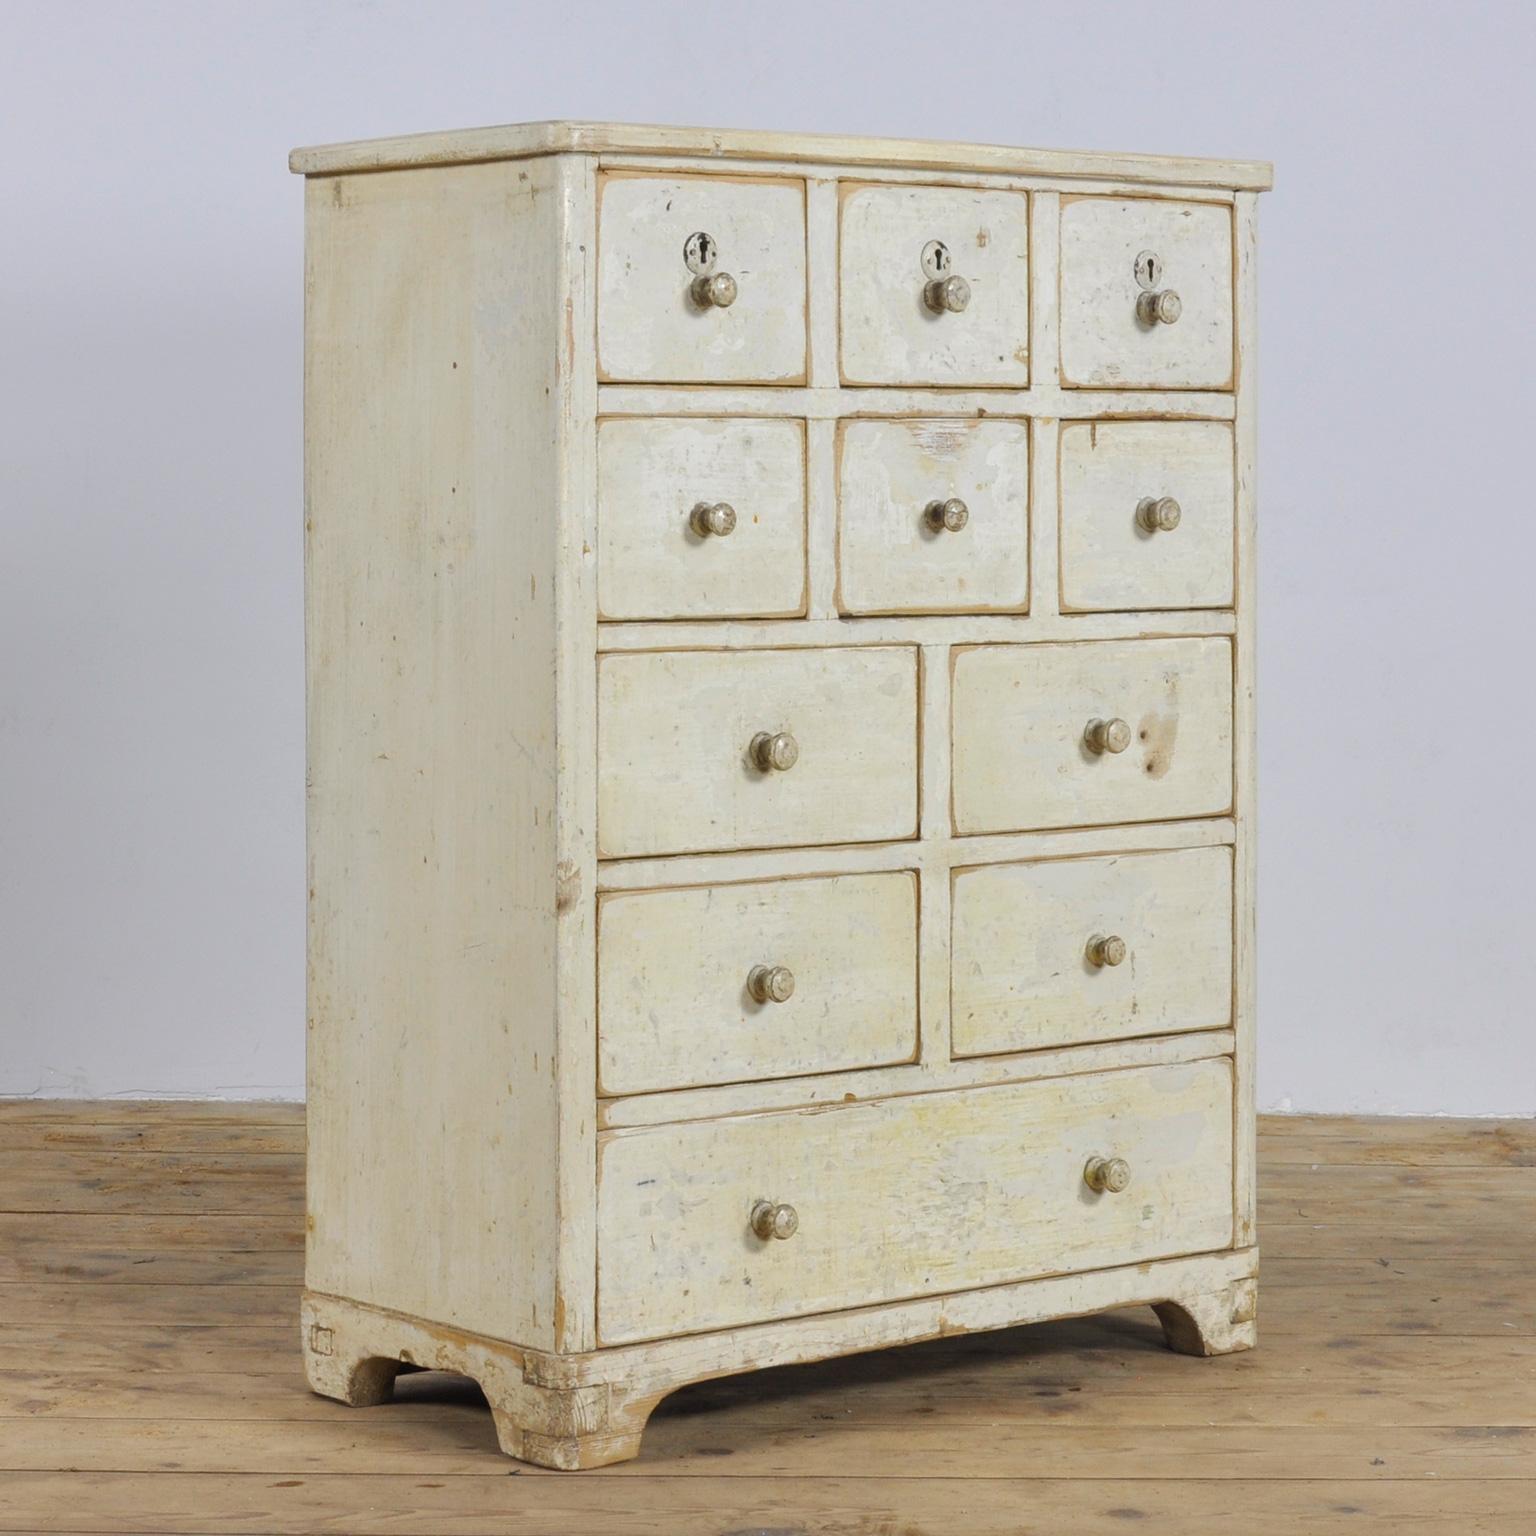 Chest of drawers made of pine in the 1930s. With different sizes drawers.